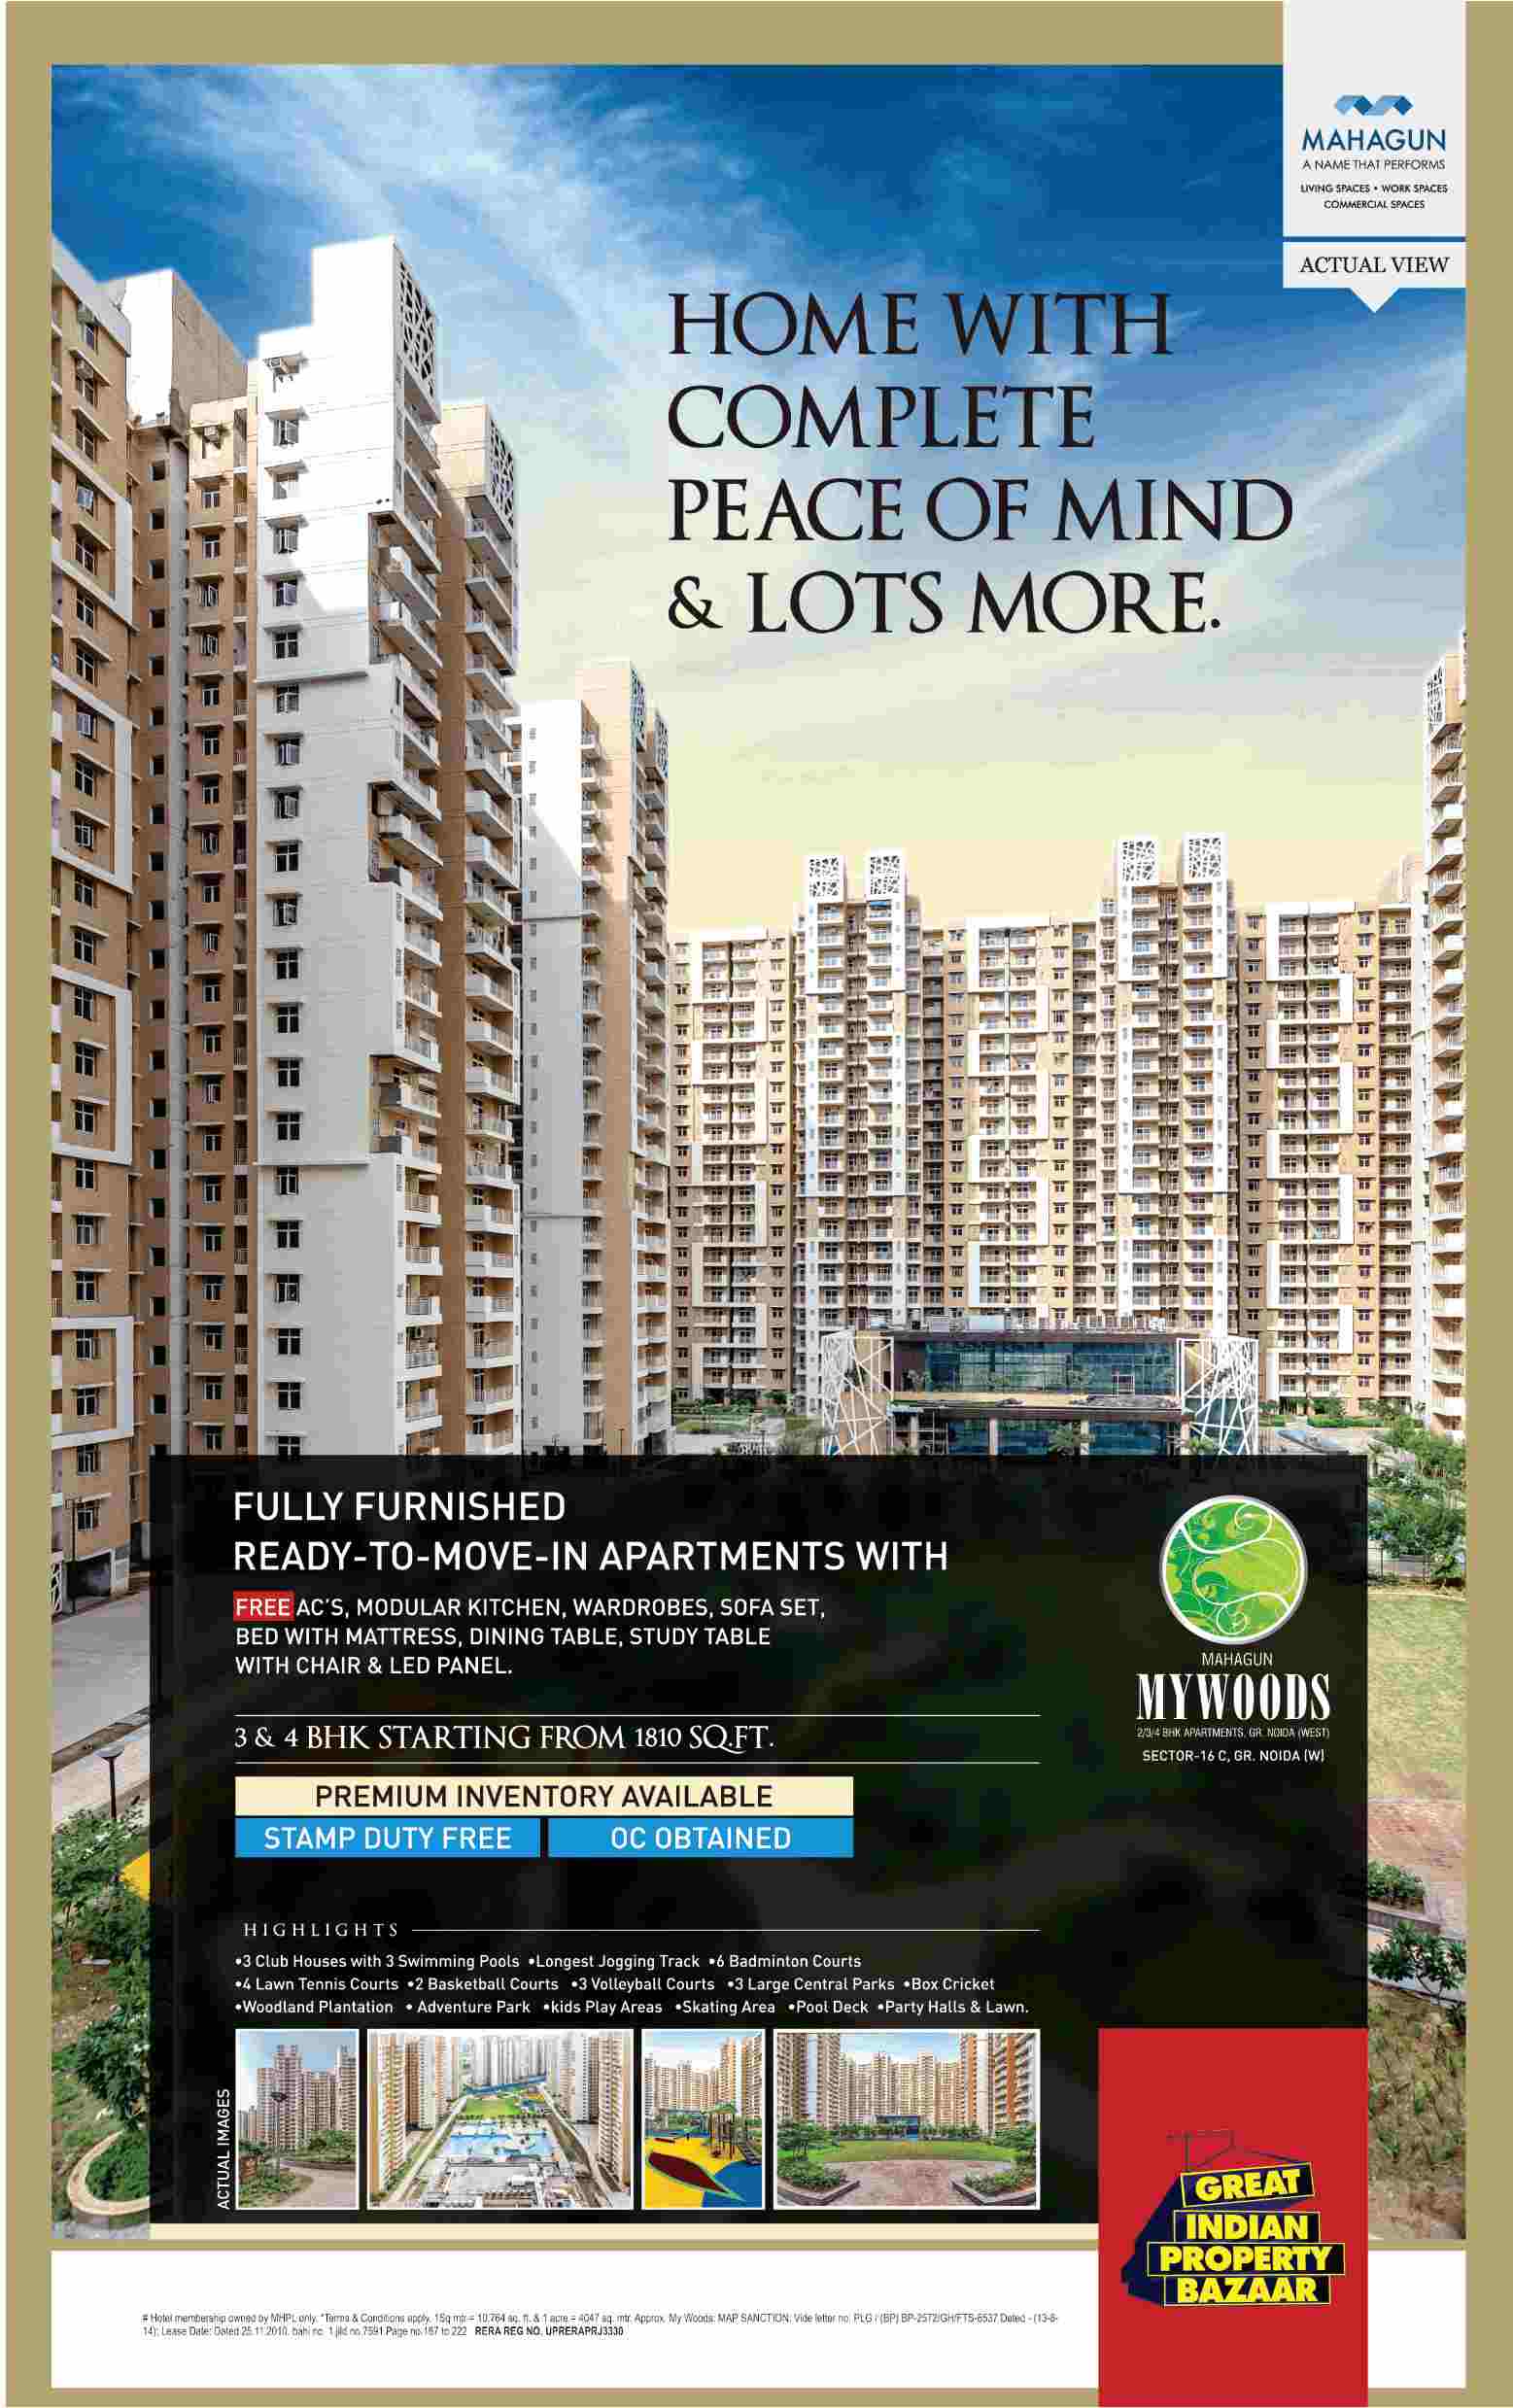 Reside in fully furnished ready to move apartments at Mahagun Mywoods in Greater Noida